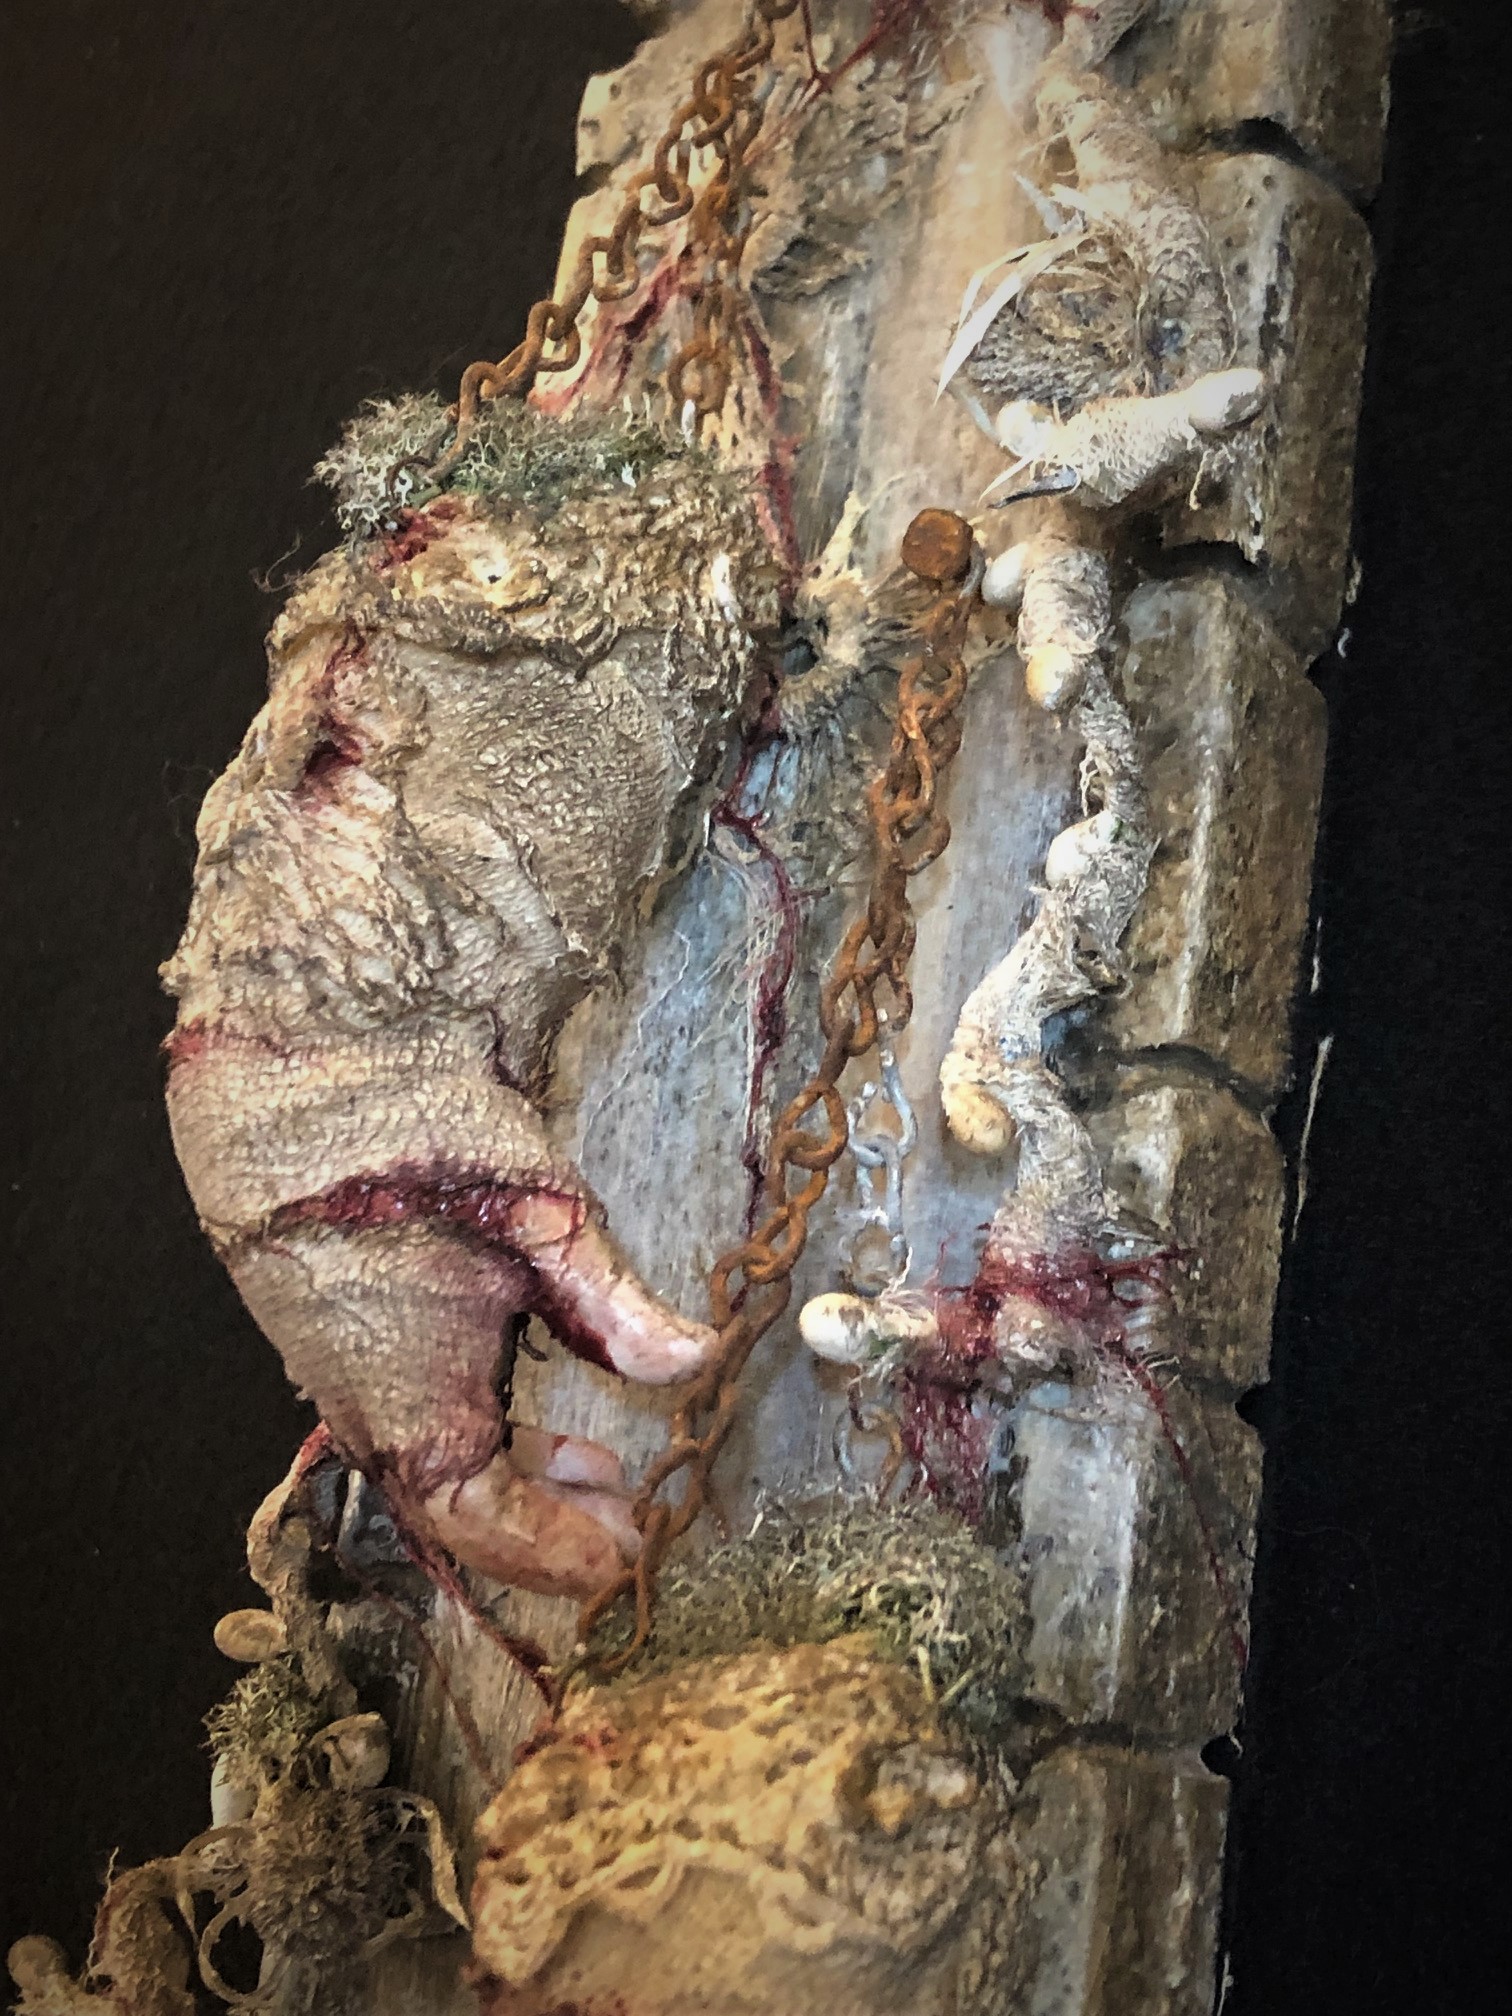 close-up of mixed media assemblage on board with severed, cracked and bleeding hands held up by chain and hanging from nails